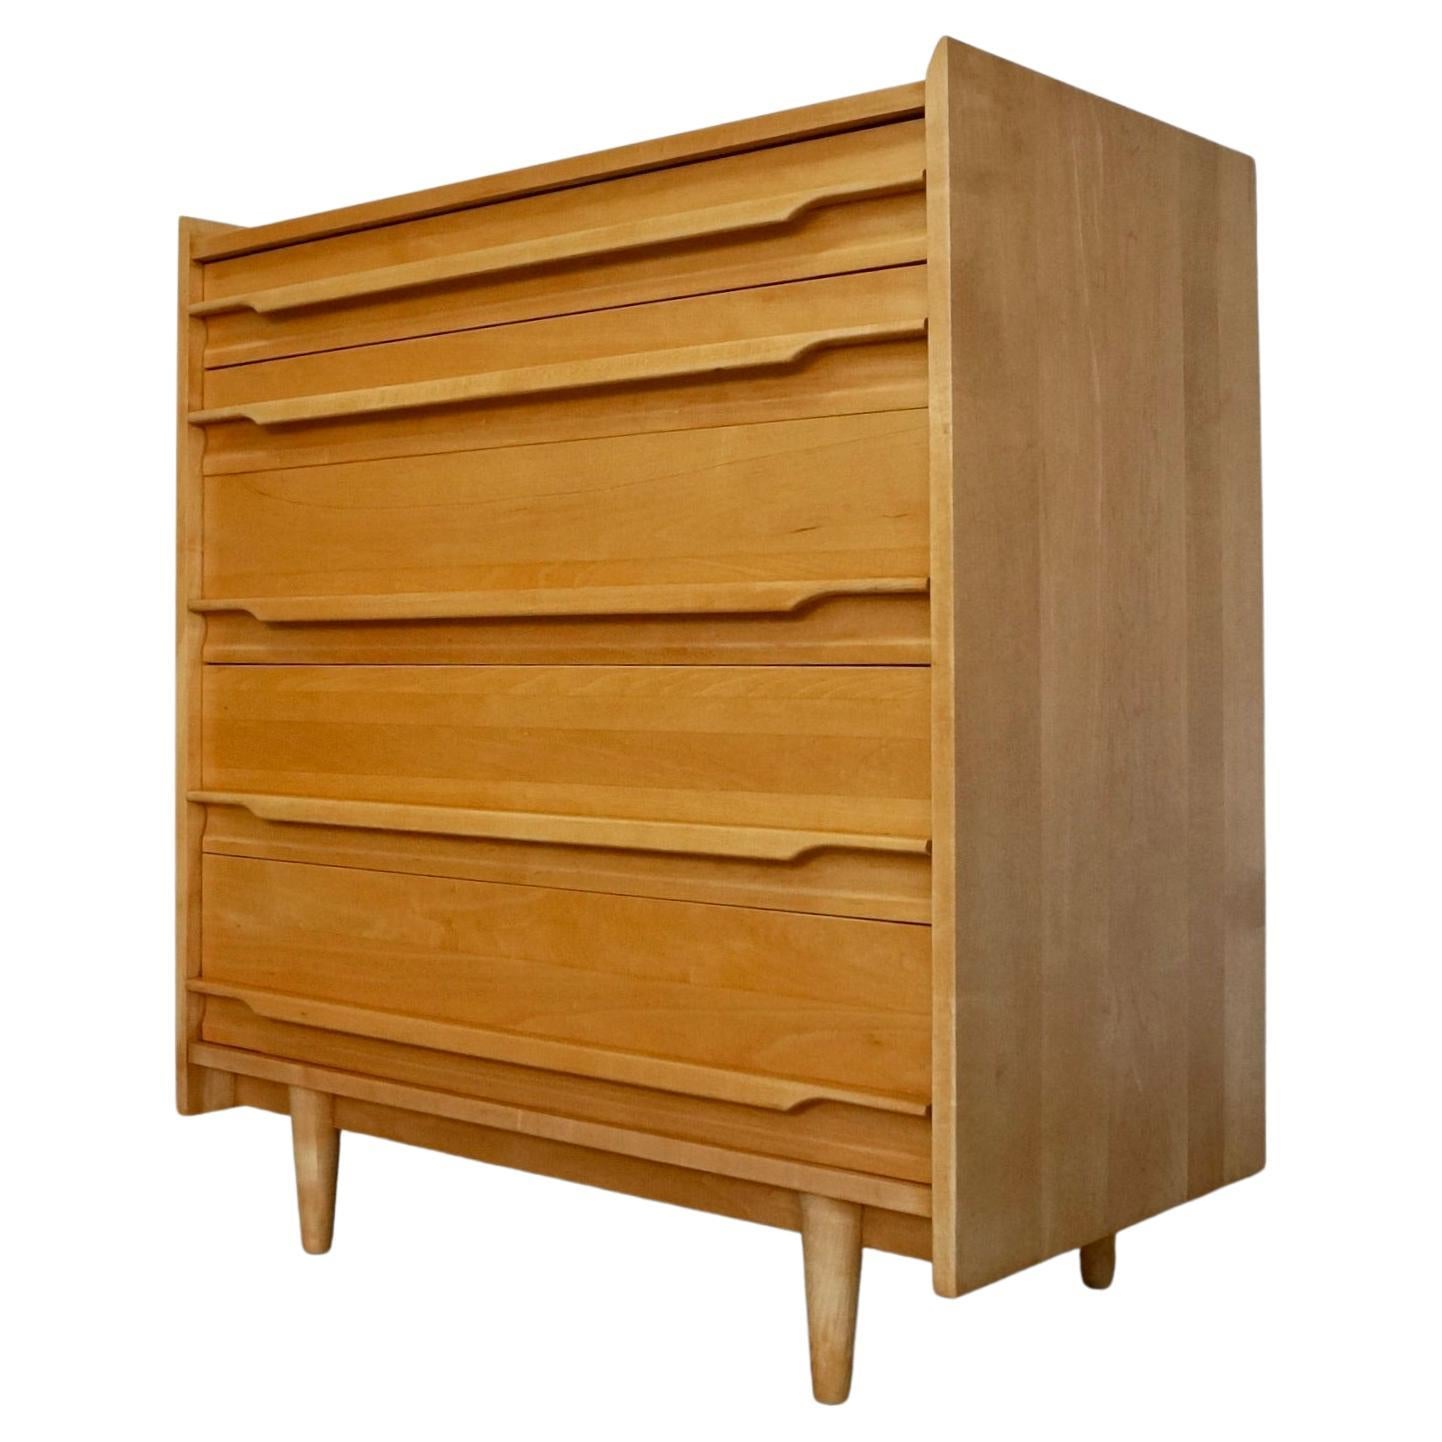 1950's Mid-Century Modern Solid Maple Dresser by Crawford For Sale